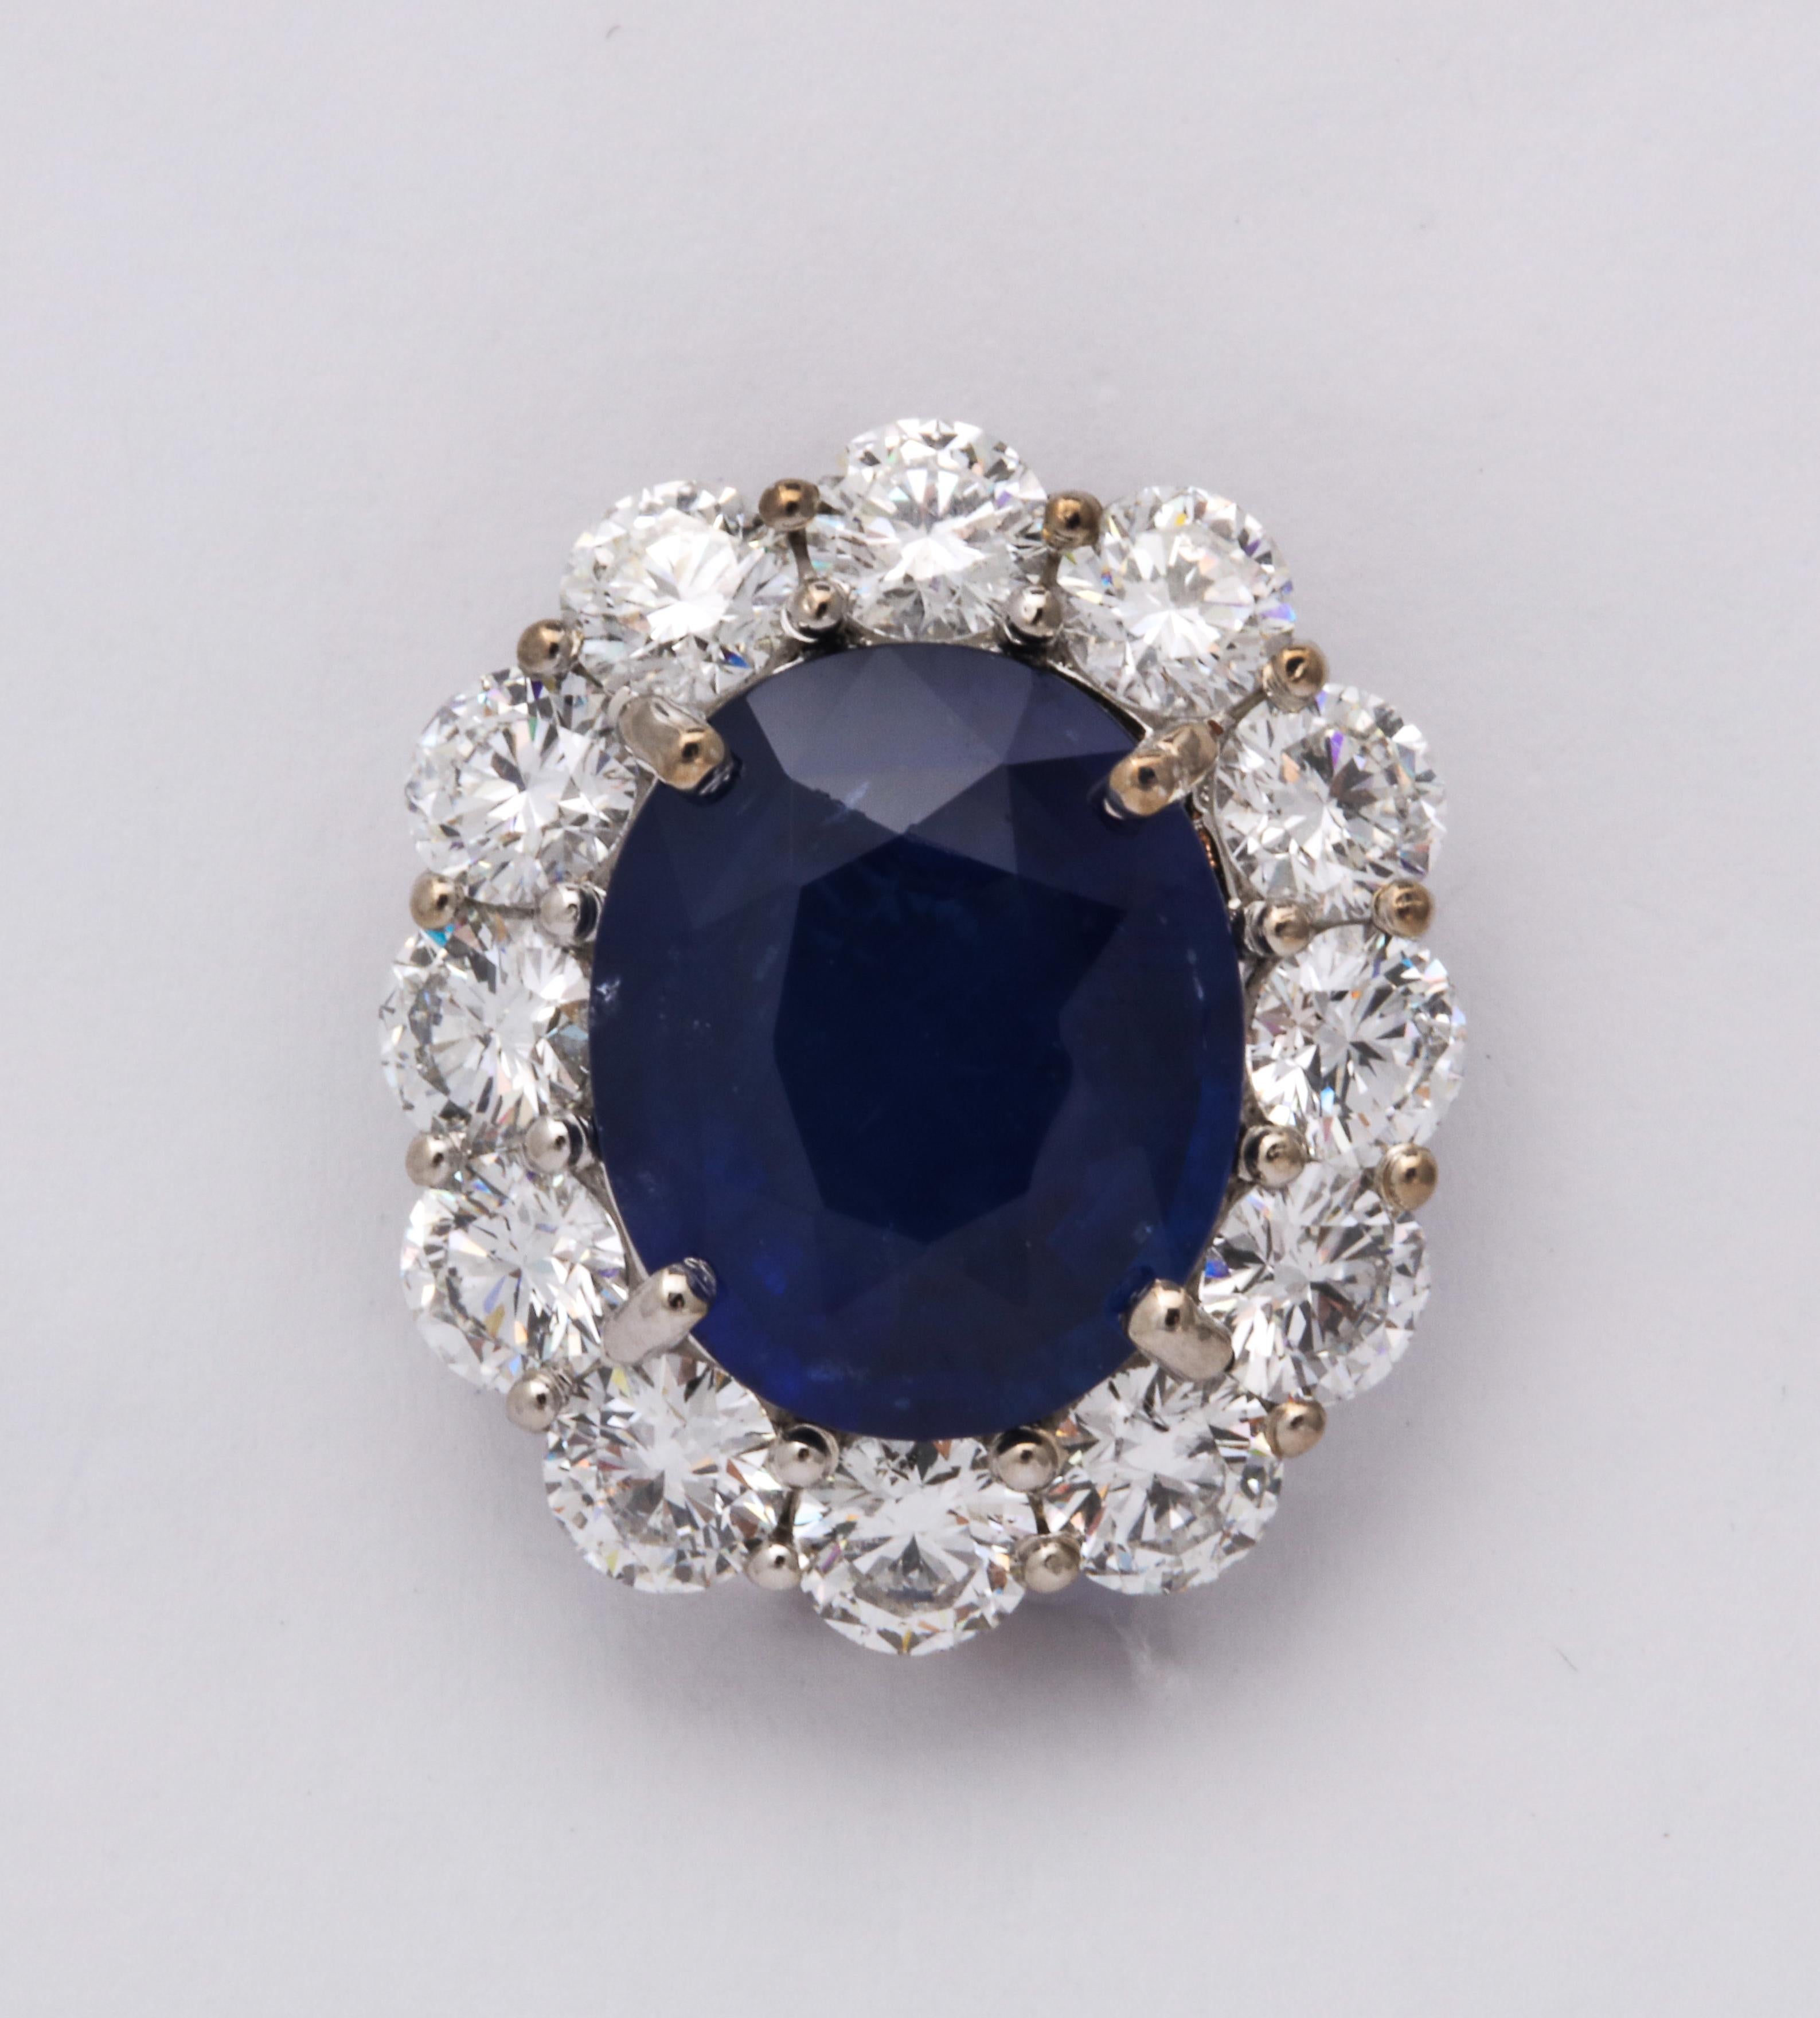 
A fabulous and timeless sapphire and diamond earring!

13.49 carats of beautiful Ceylon sapphires set in a custom made 5.62 carat diamond mounting. 

Certified CEYLON sapphires by Christian Dunaigre of Switzerland.

18k white gold.

.77 inches